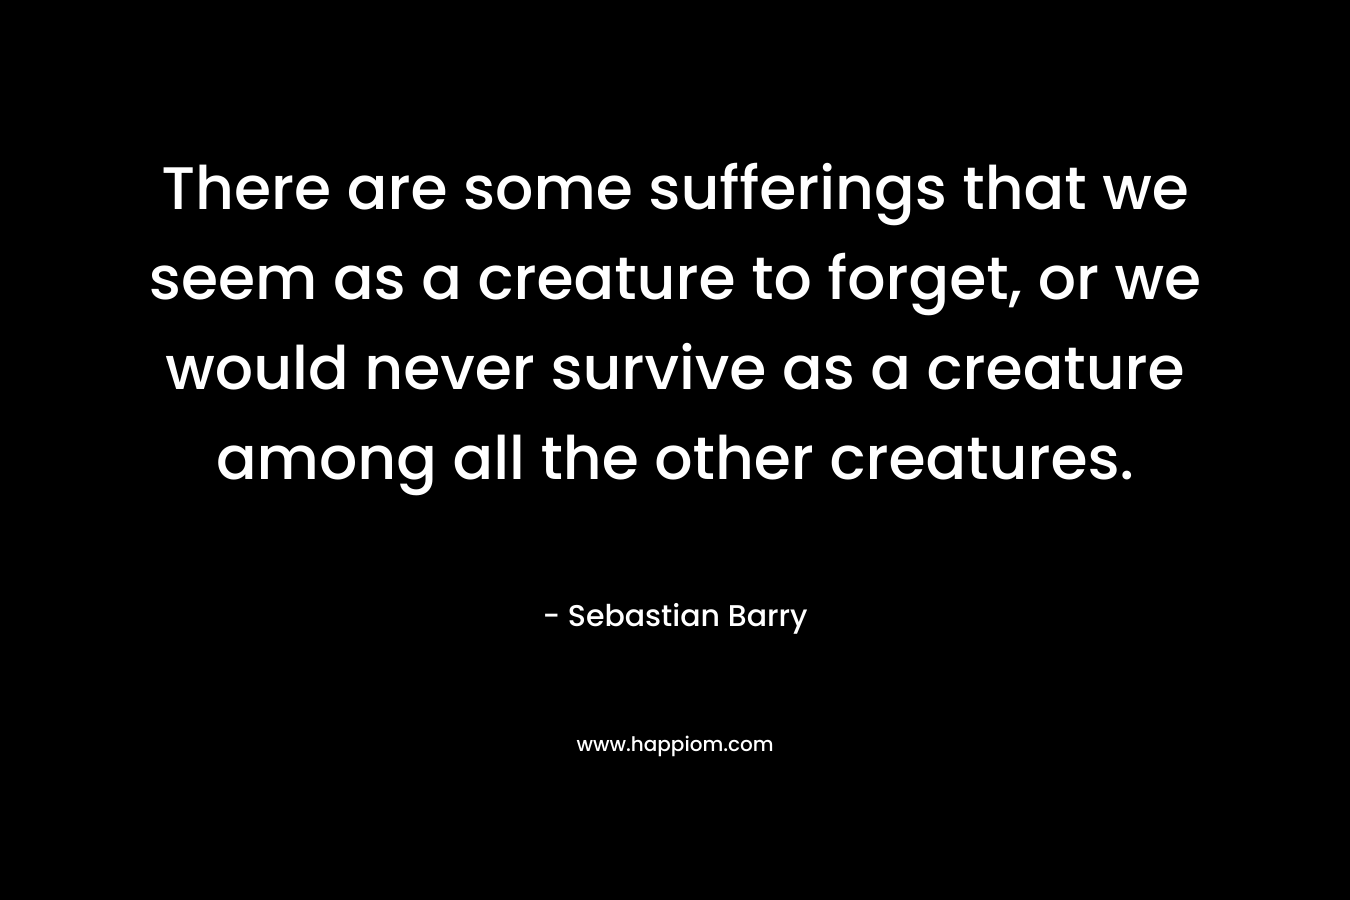 There are some sufferings that we seem as a creature to forget, or we would never survive as a creature among all the other creatures.